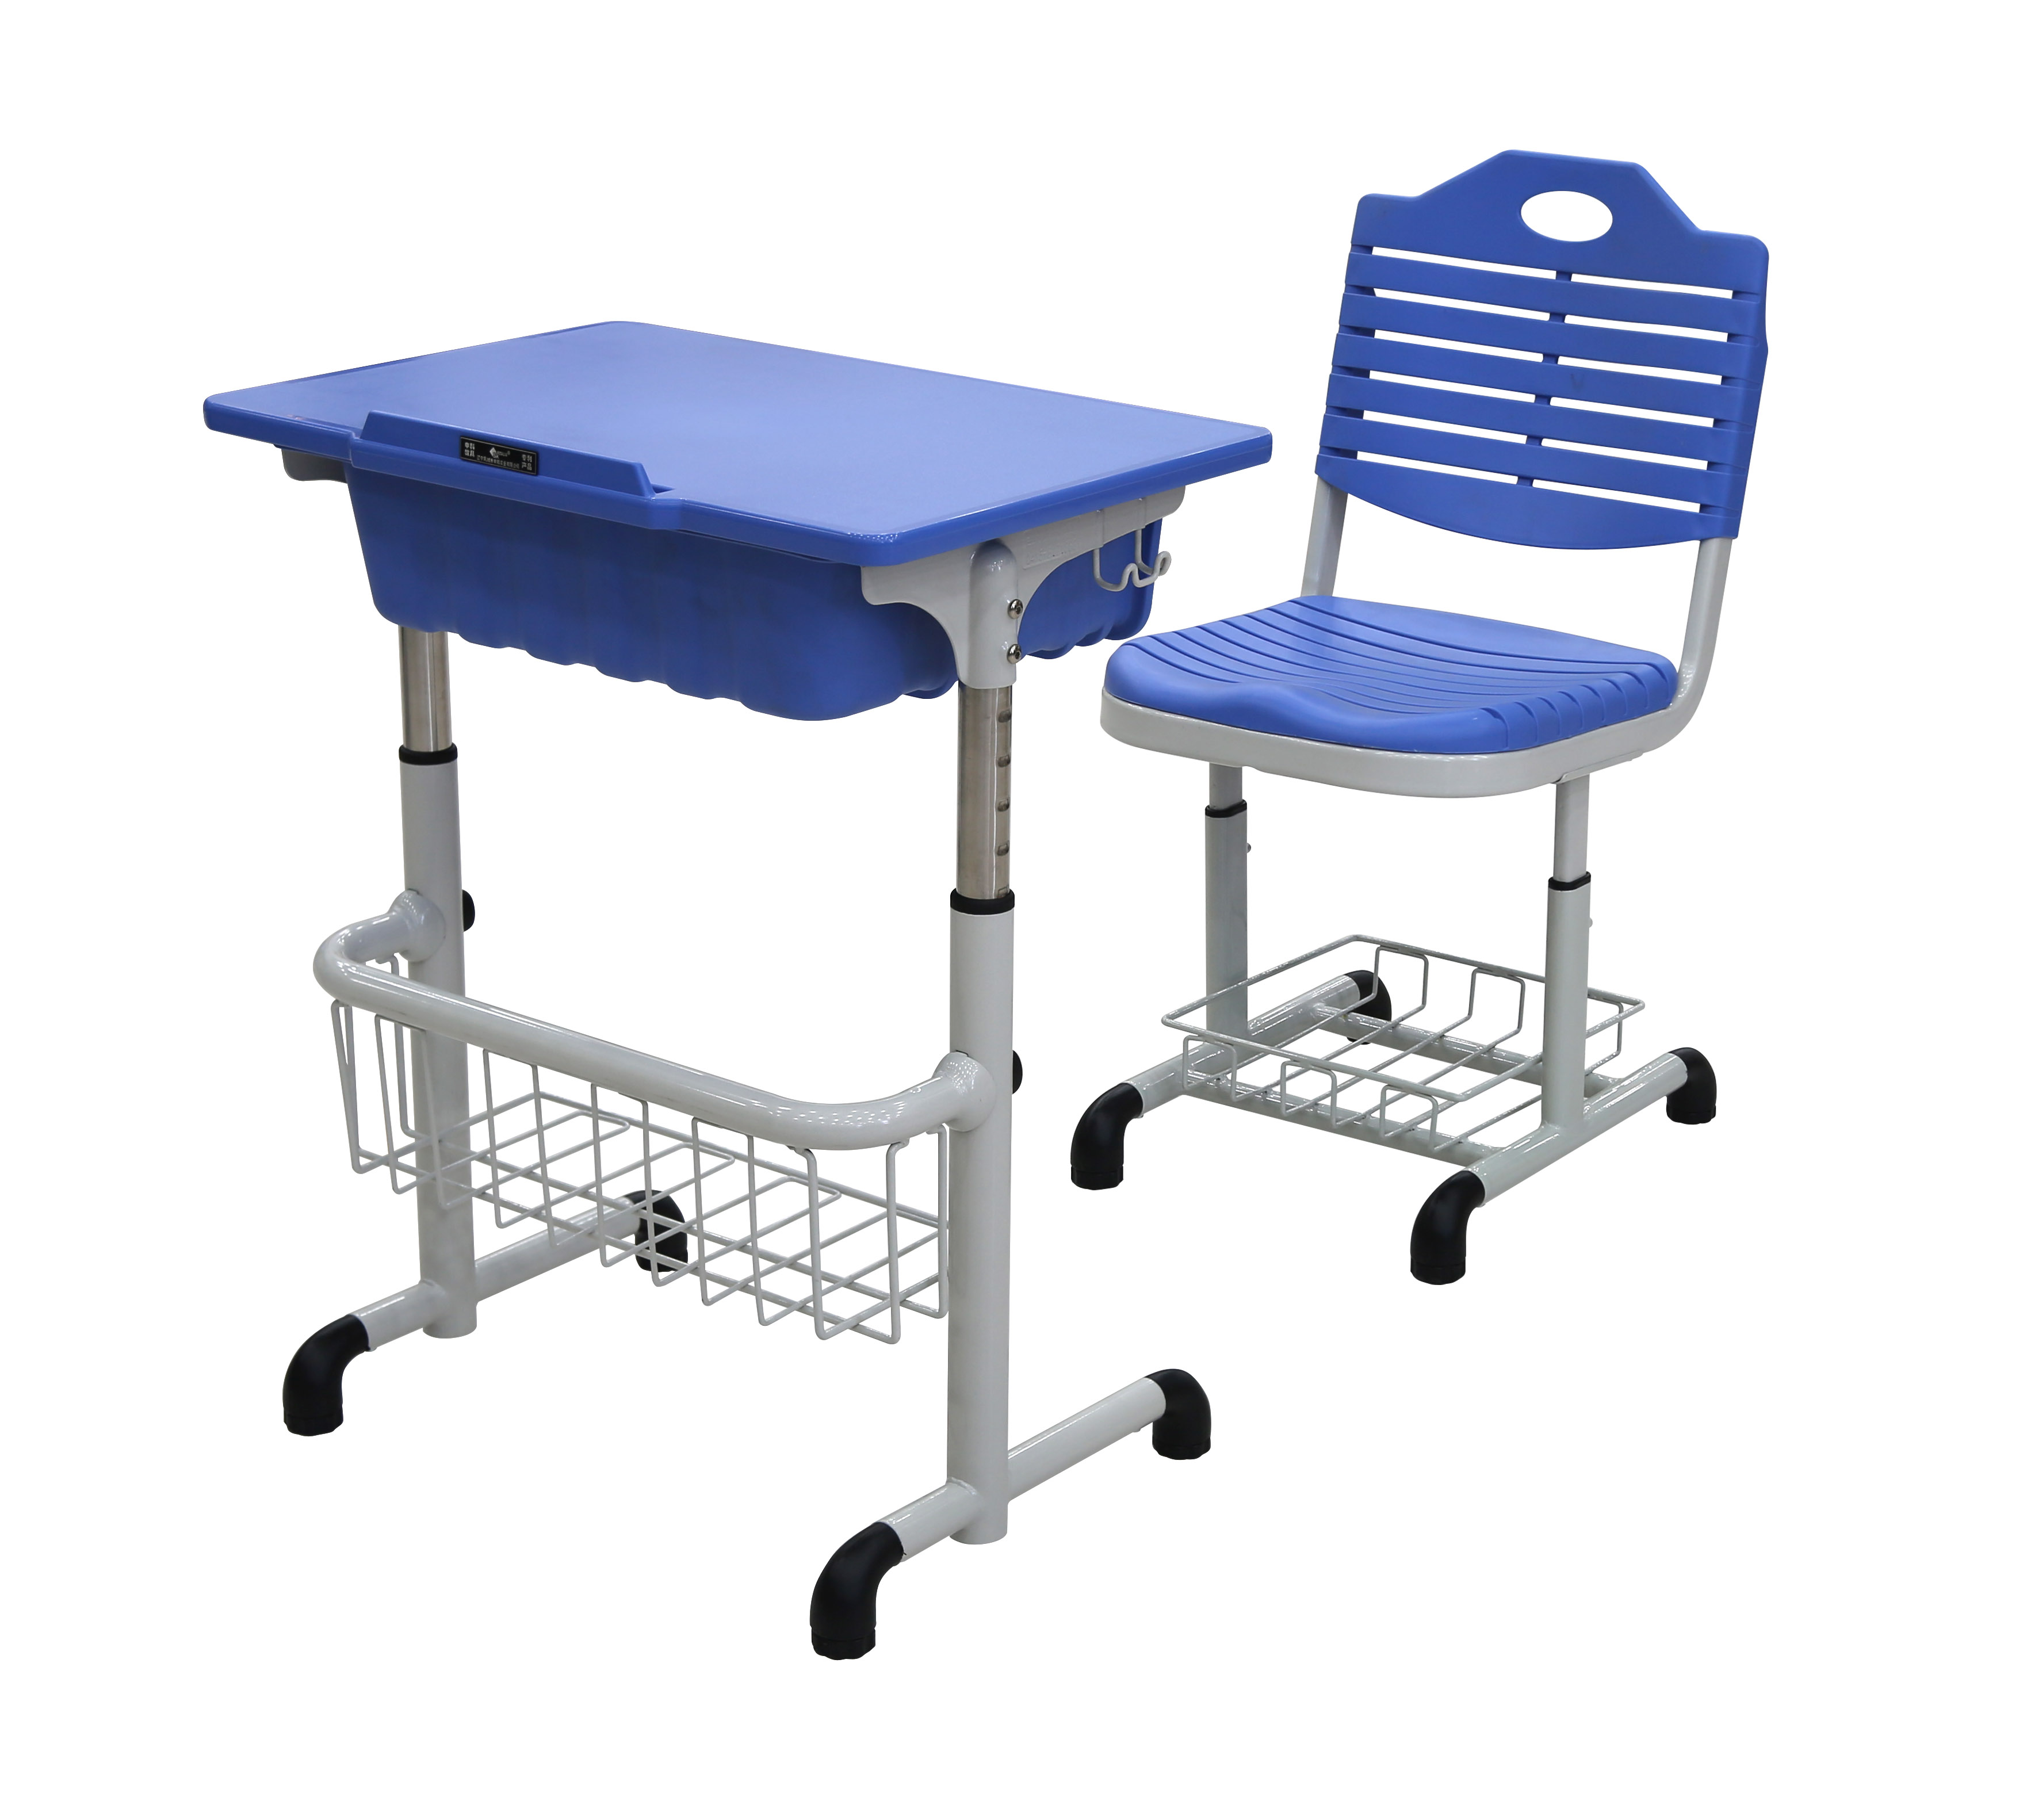 Adjustable High Quality Stundent Chair